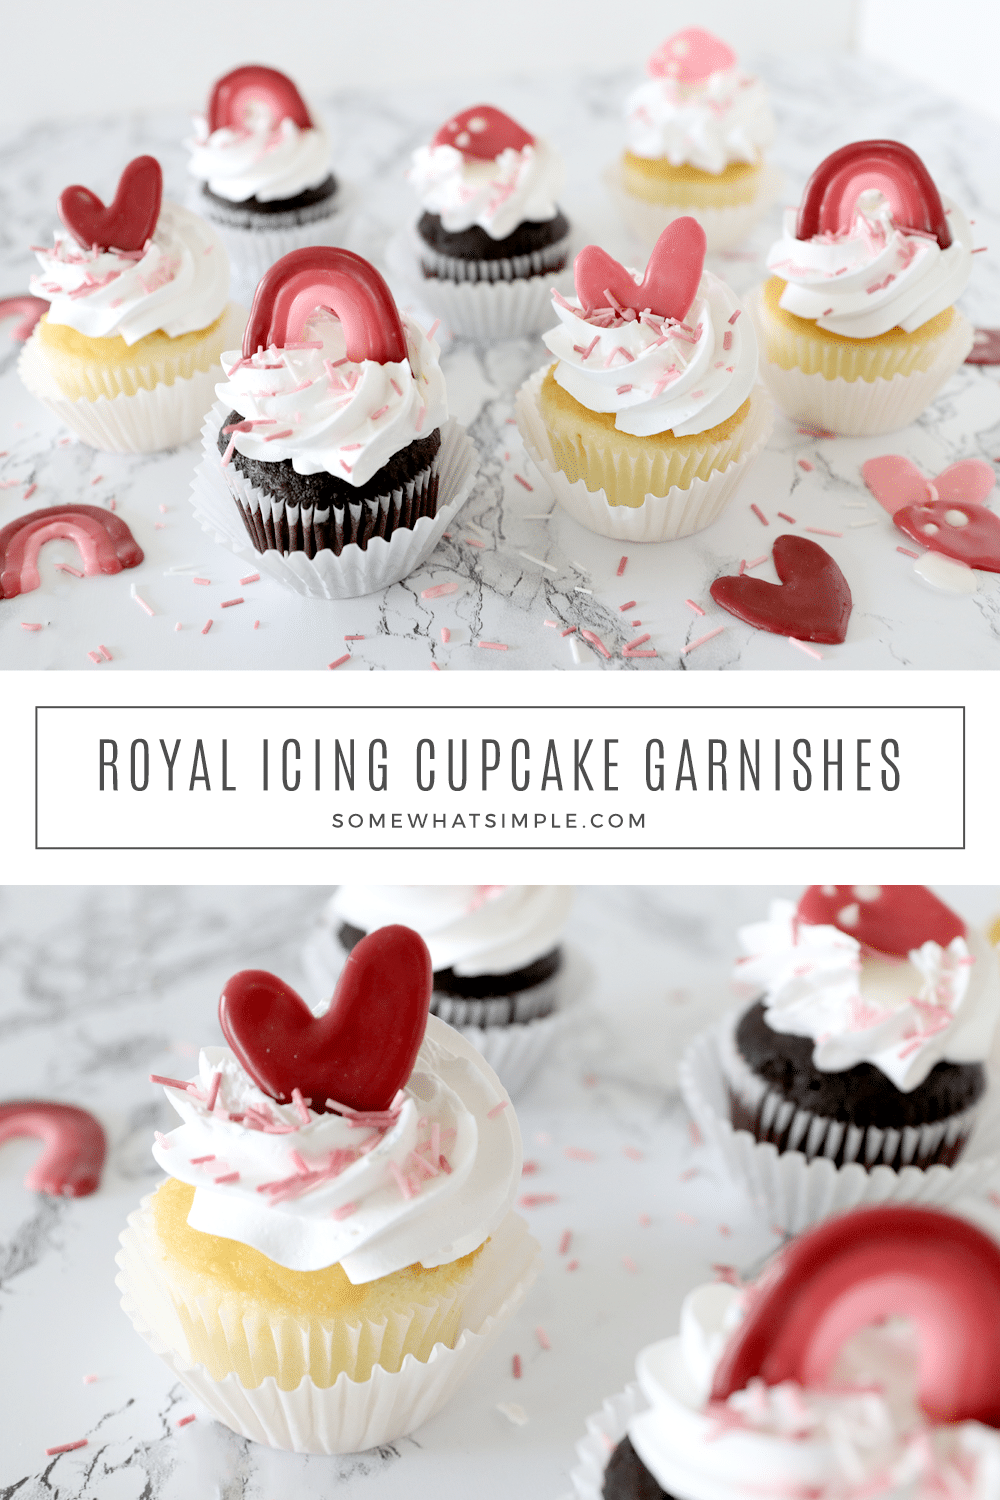 Learn how to use royal icing for cupcakes and baked goods with this simple tutorial! It's easy to do and tasty too! via @somewhatsimple